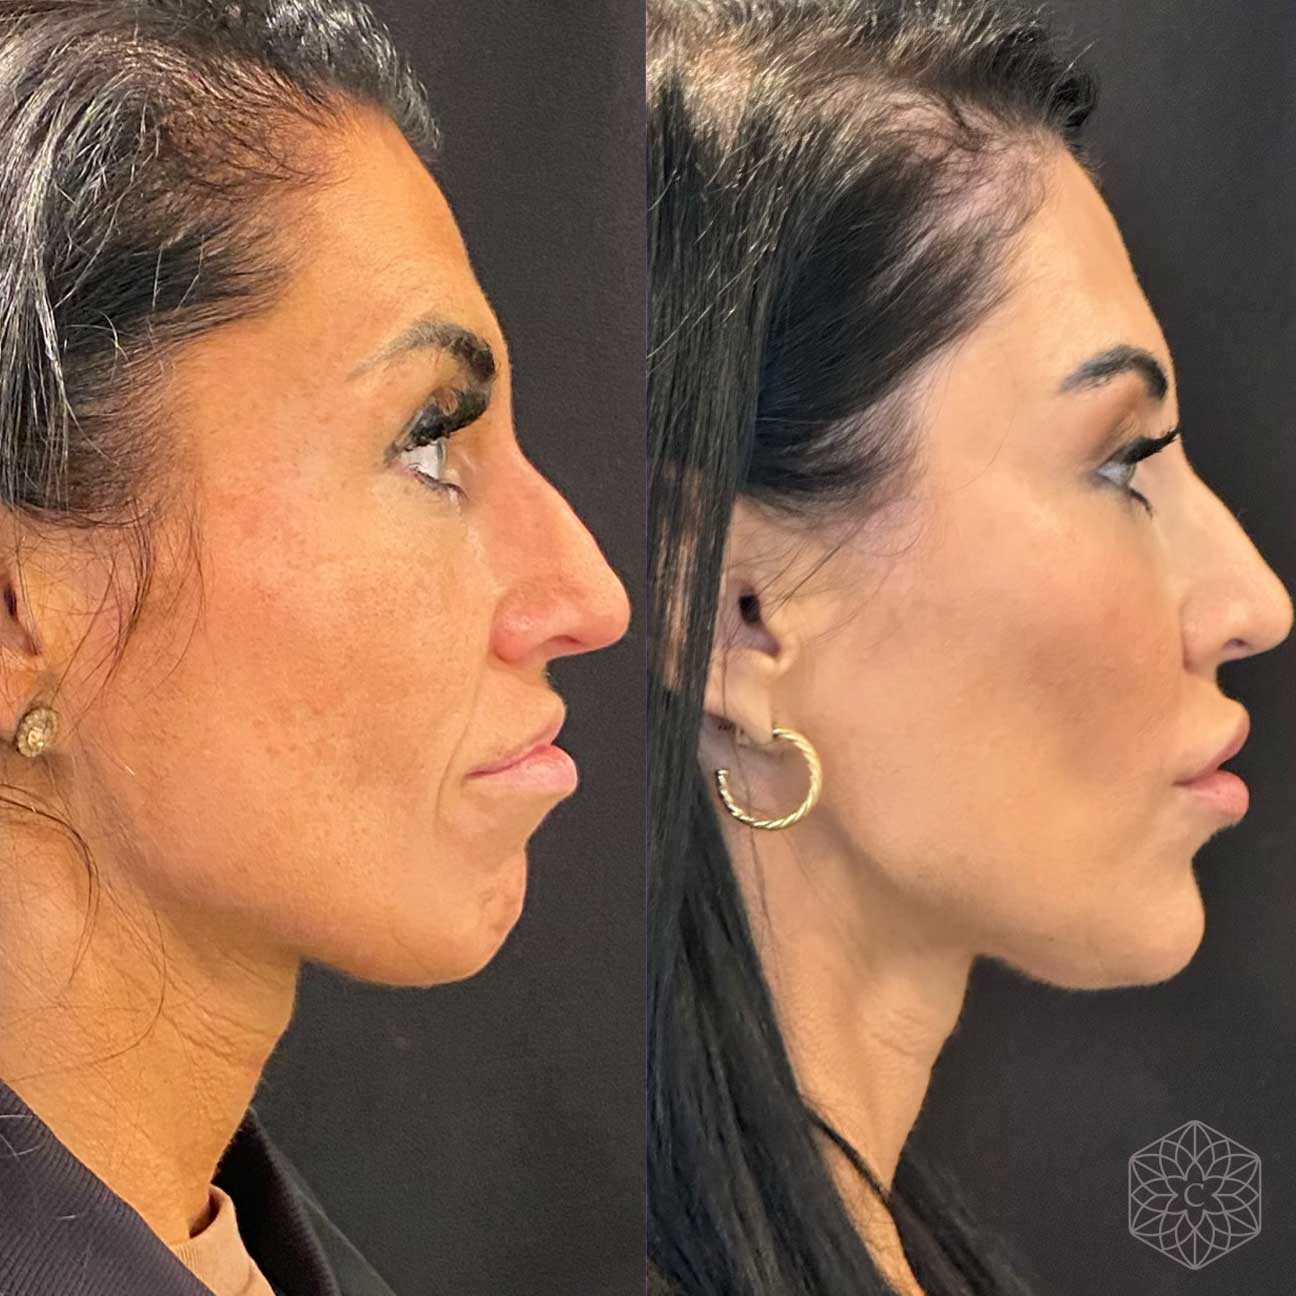 Achieve a more balanced face with expertly placed fillers